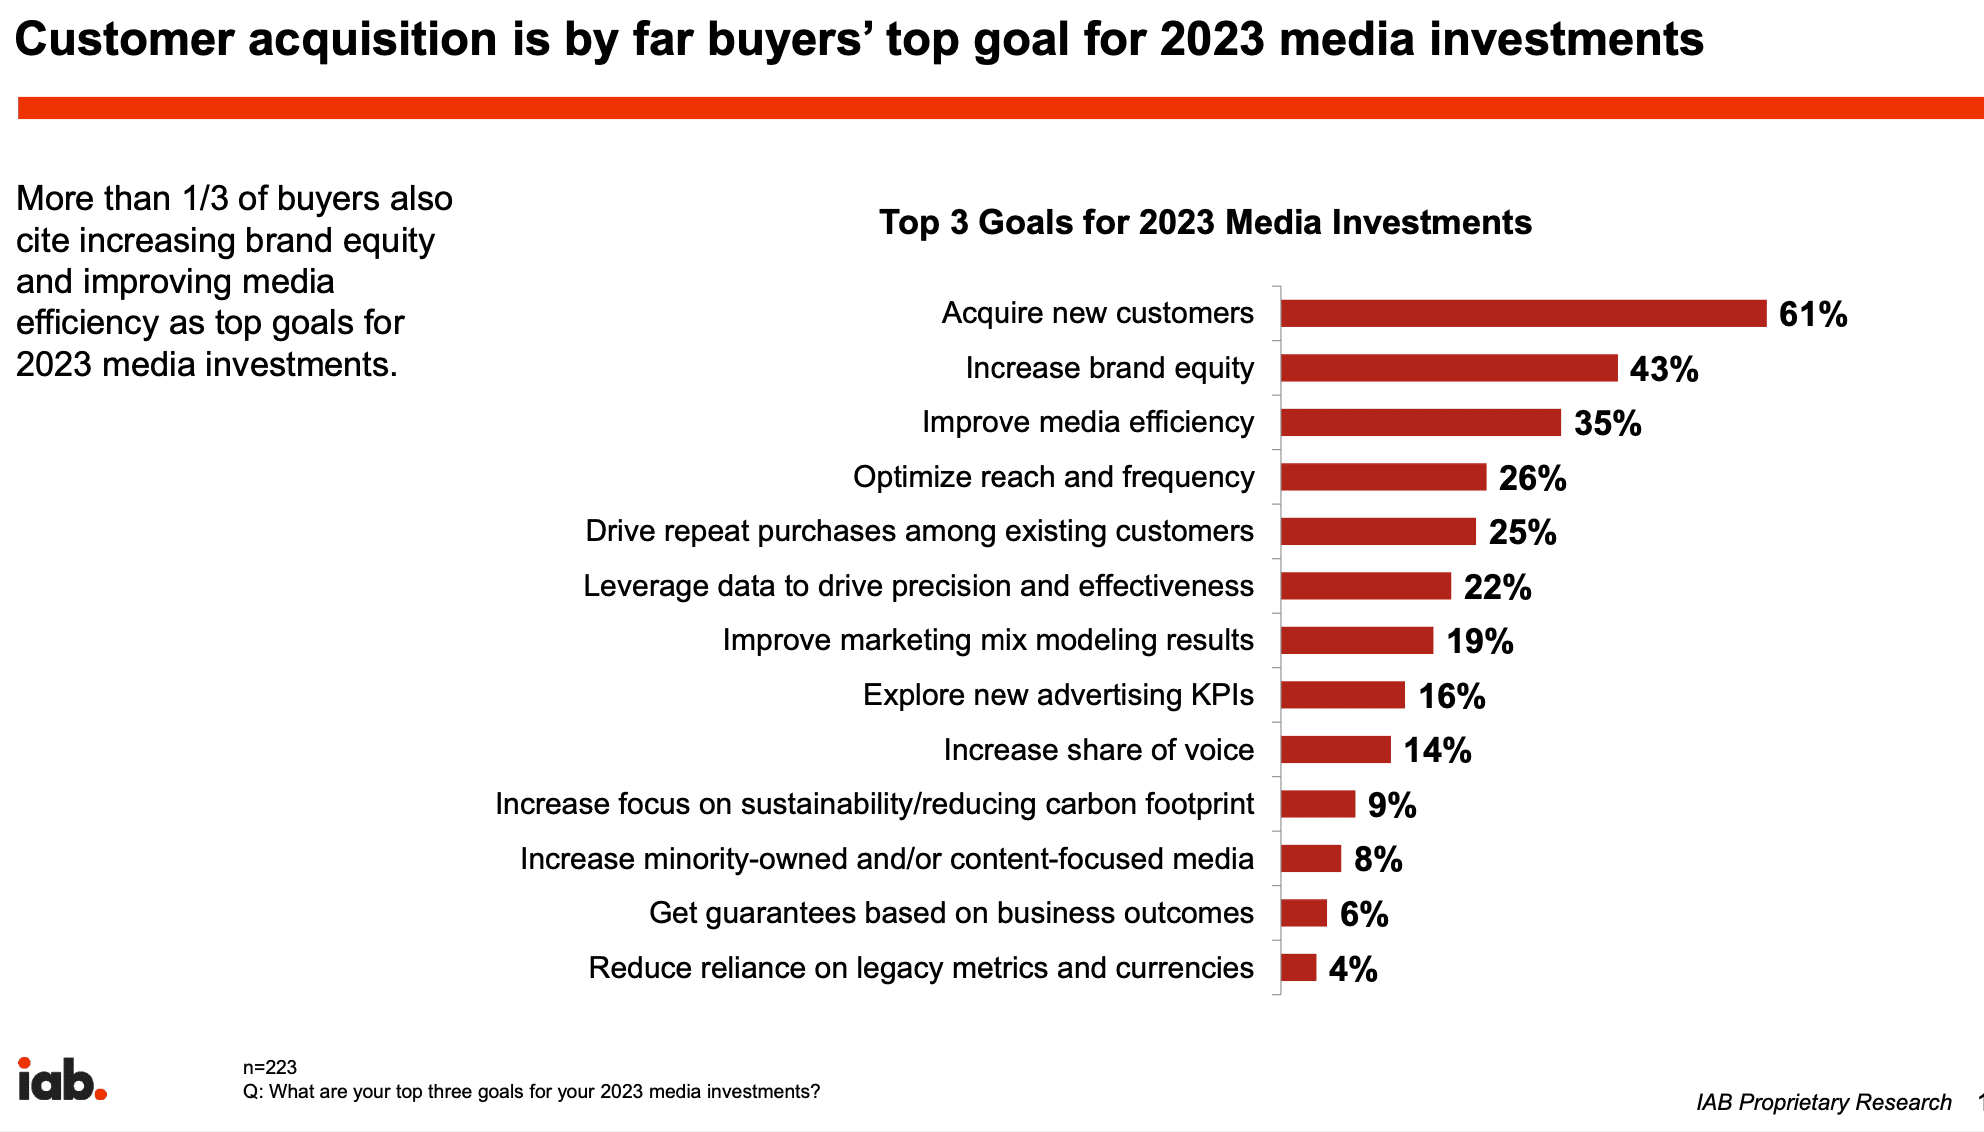 customer acquisition is buyers' top goal for 2023 media investments